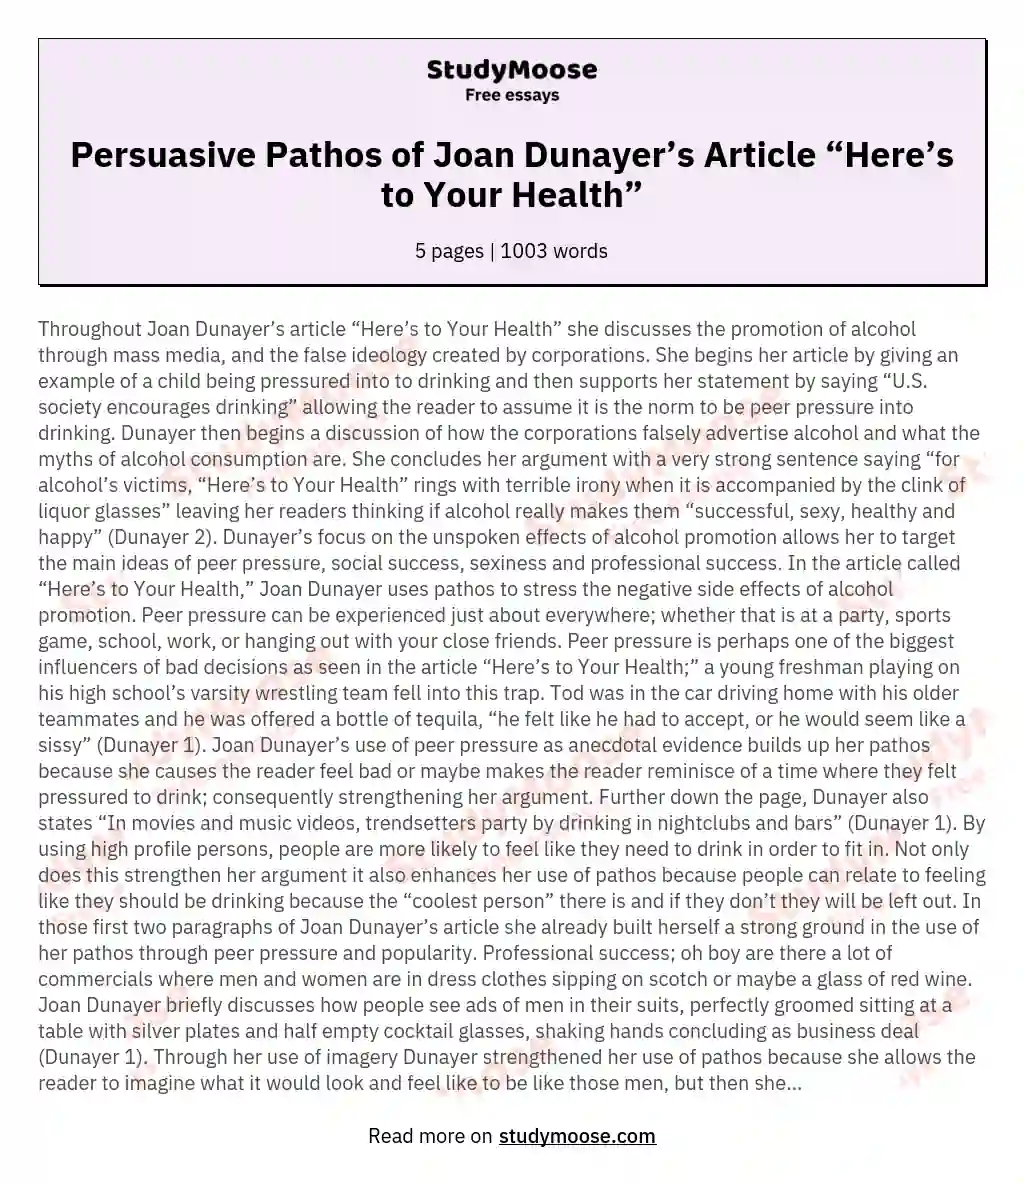 Persuasive Pathos of Joan Dunayer’s Article “Here’s to Your Health”